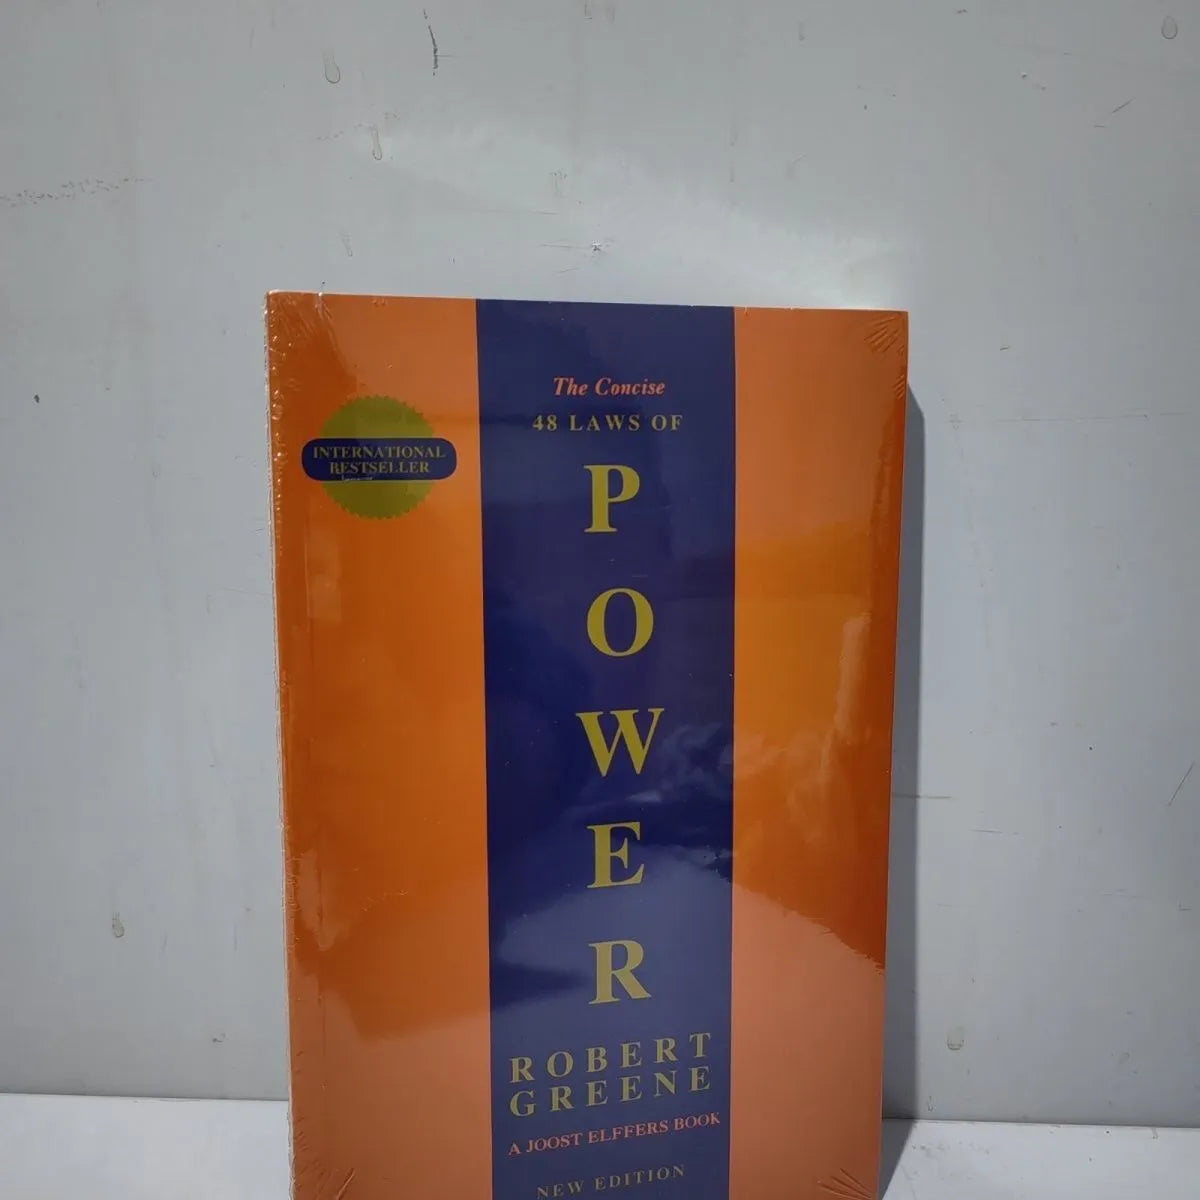 The Concise 48 Laws of Power By Robert Greene